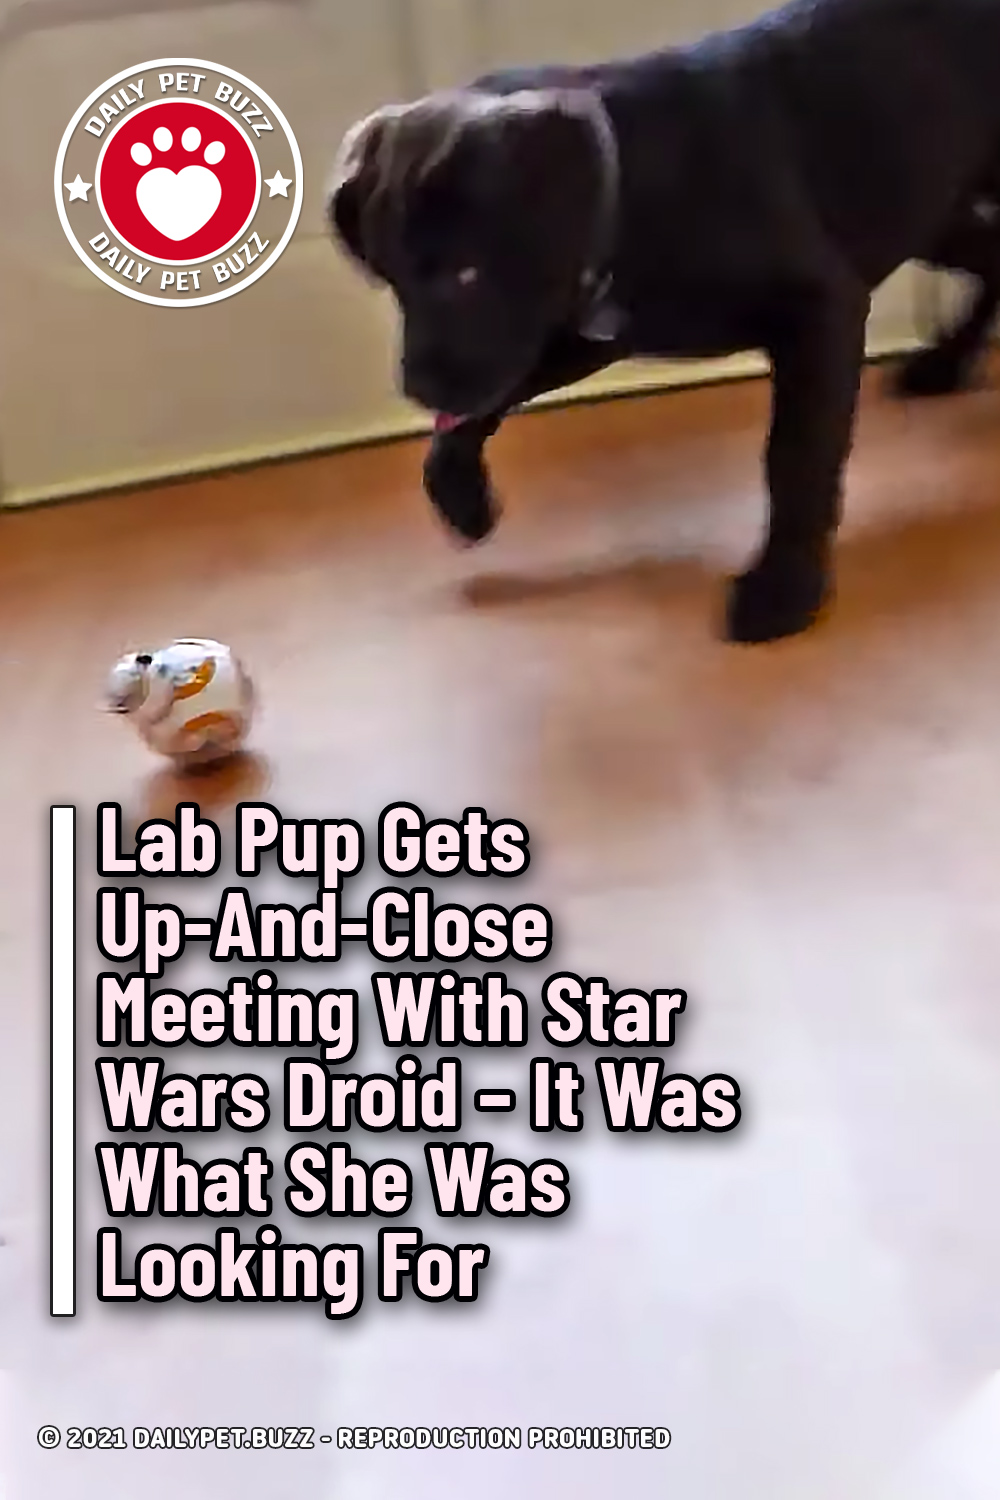 Lab Pup Gets Up-And-Close Meeting With Star Wars Droid. It Was What She Was Looking For